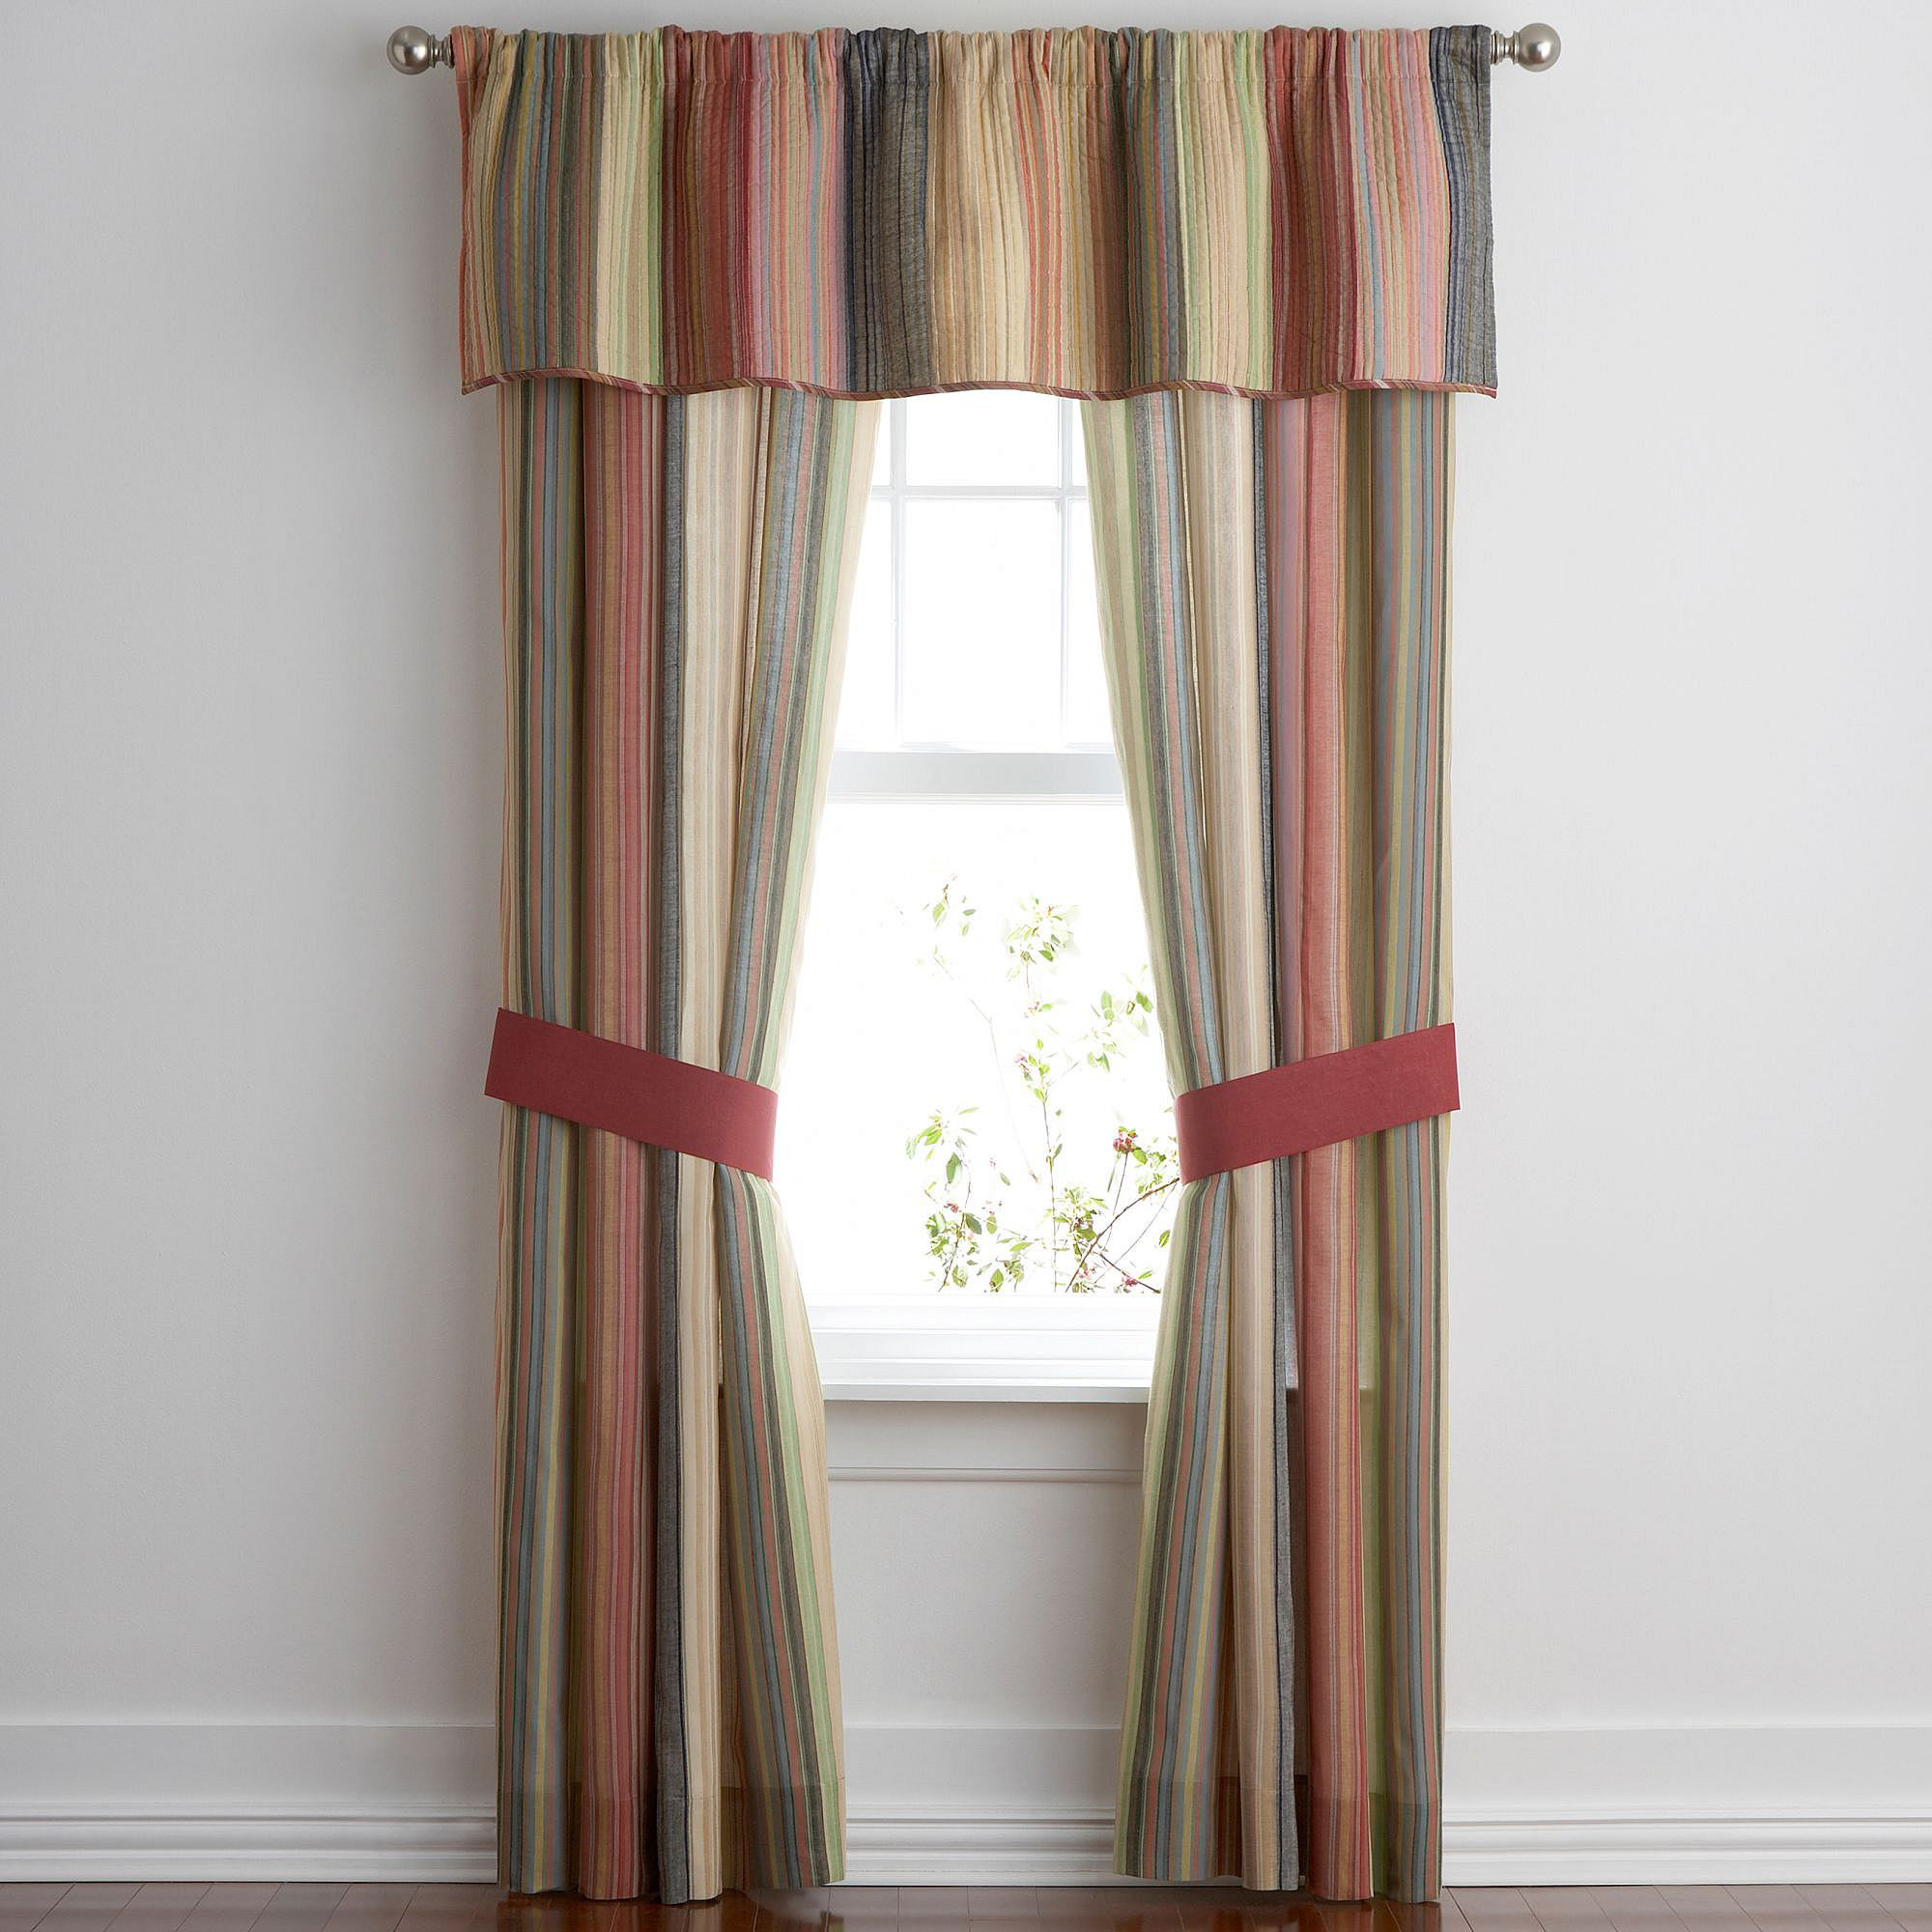 Penneys Kitchen Curtains
 Curtain Enchanting Jcpenney Valances Curtains For Window